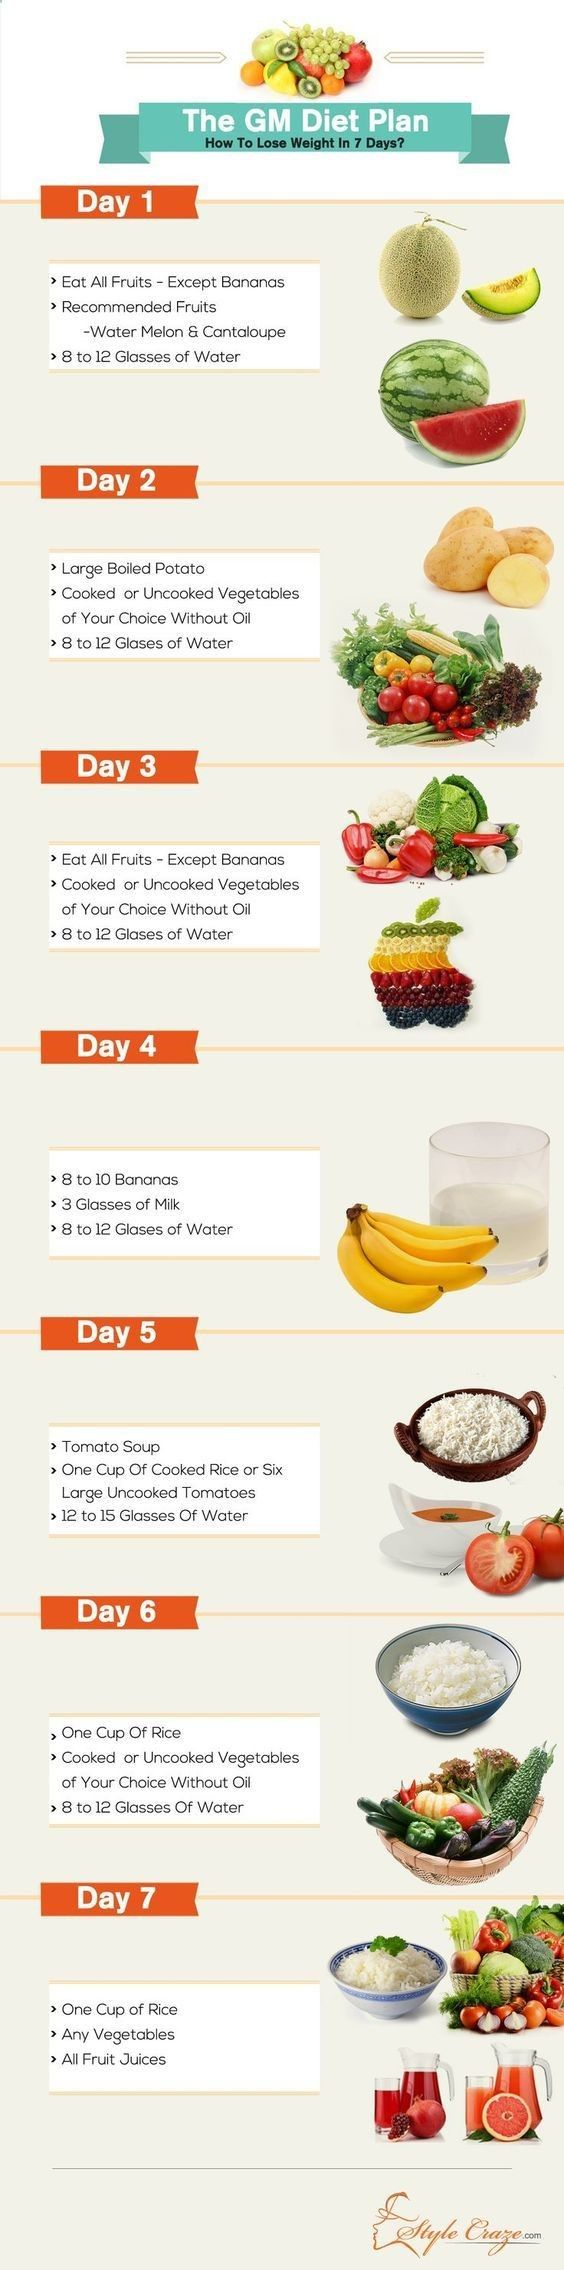 Diet Plan For Weight Loss In One Month 4 Weeks The 4 week Fat burning 